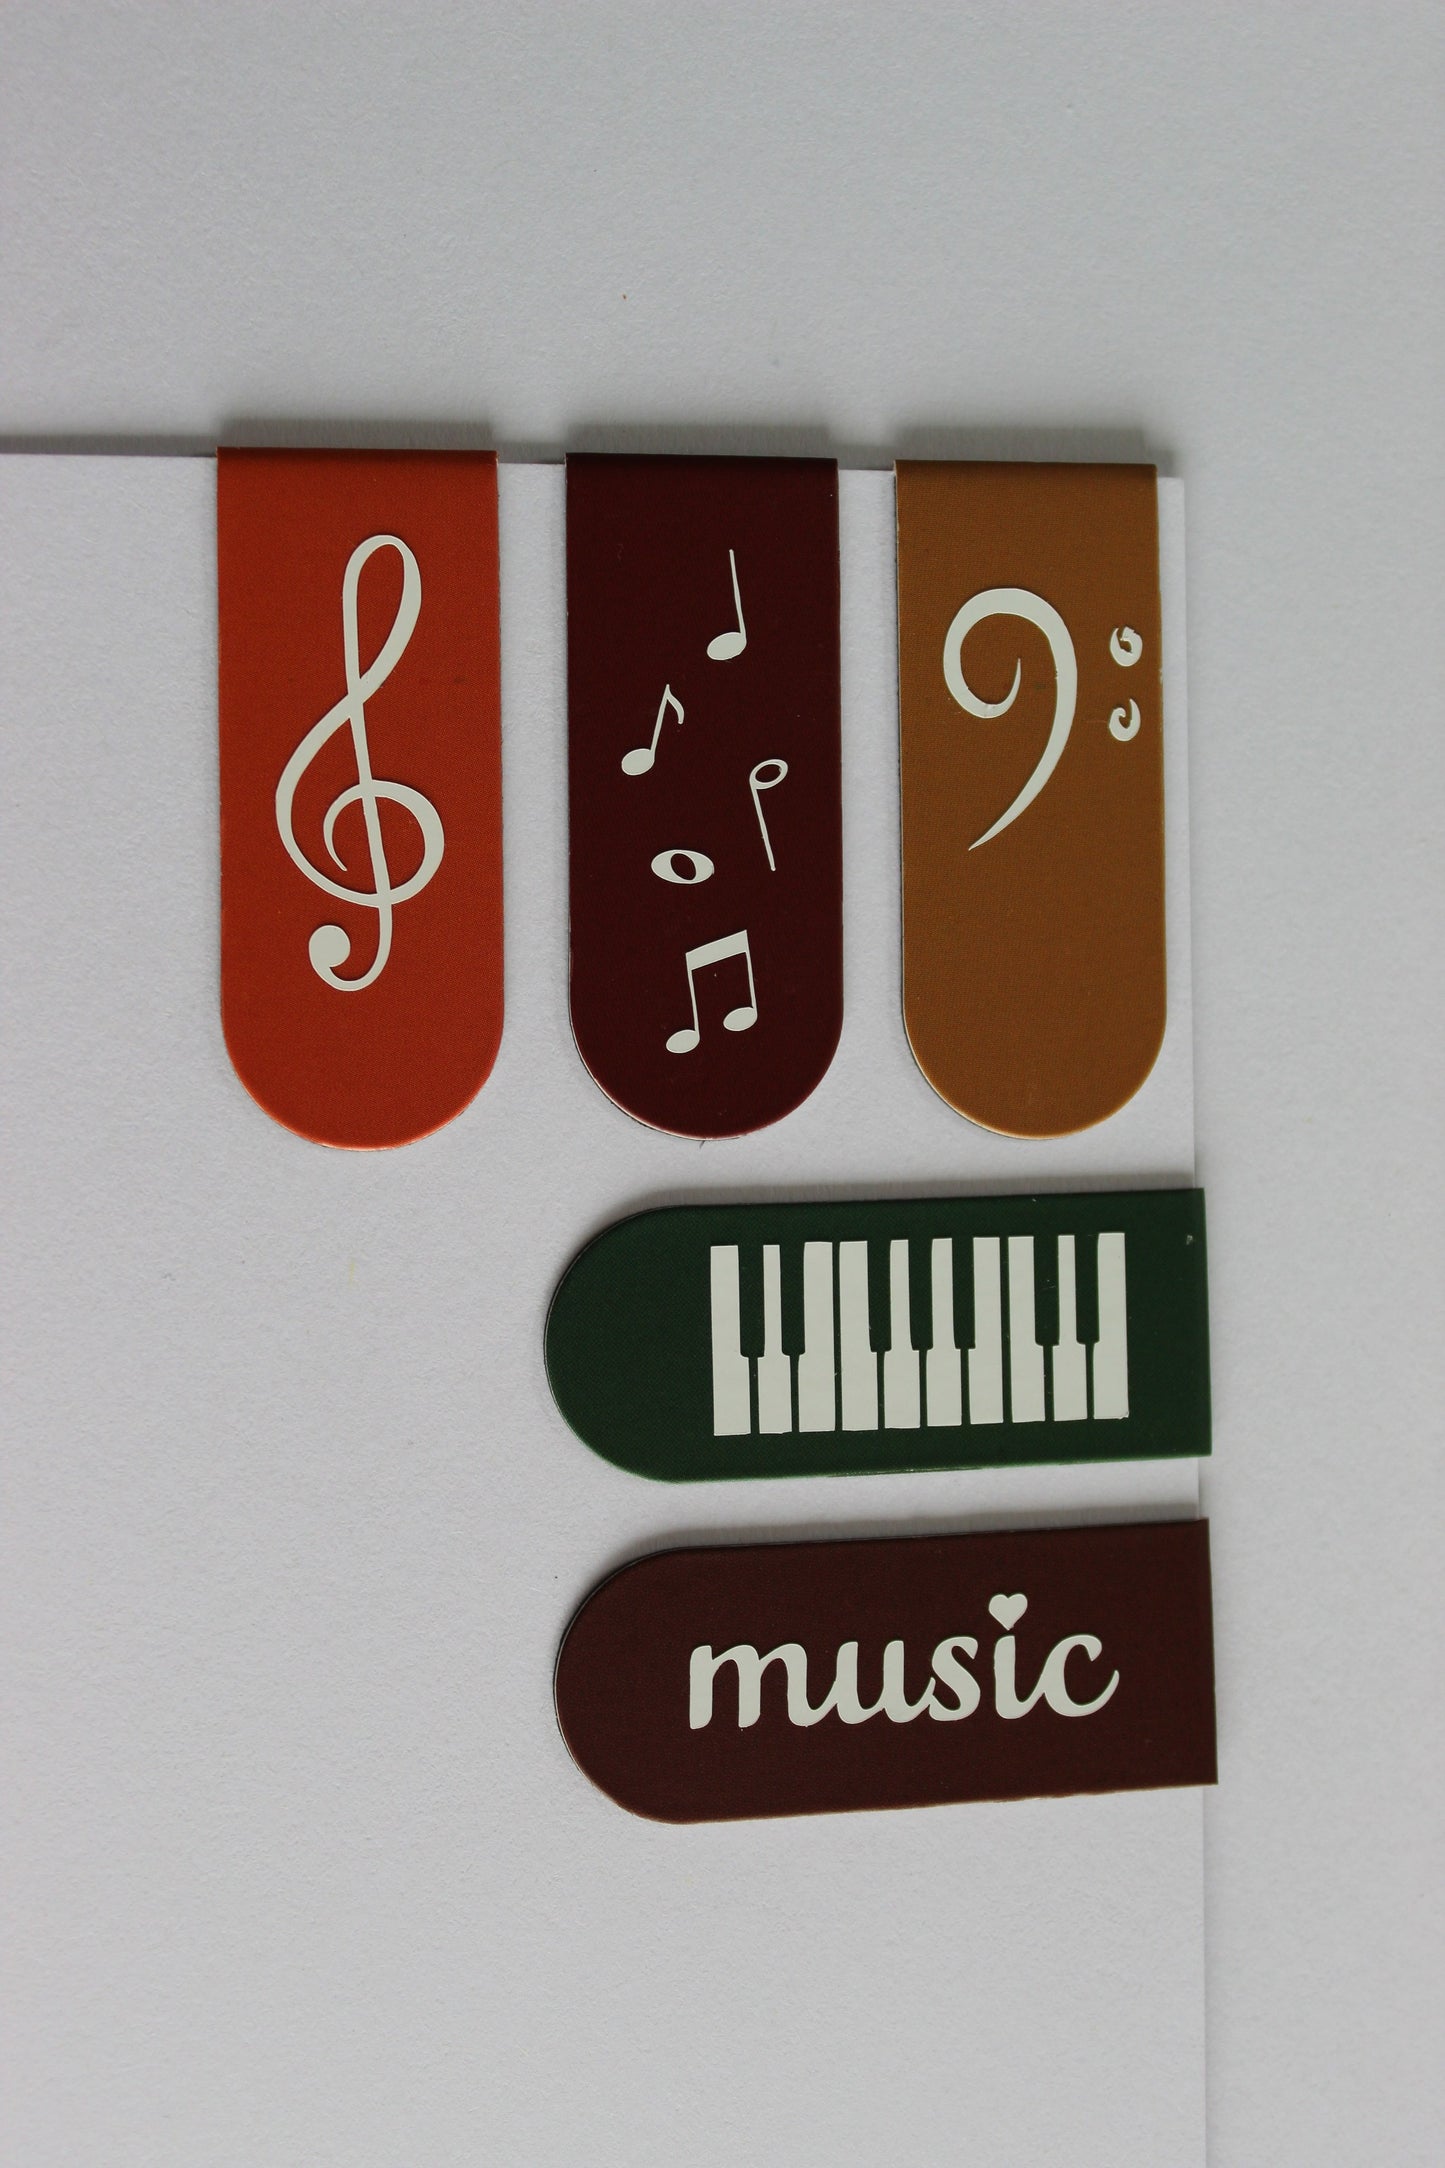 5 bookmarks on a piece of card. Orange, light brown, mustard, green and dark brown. Each bookmark has a different symbol; treble clef, piano keys, bass clef, 'music' and music notes.